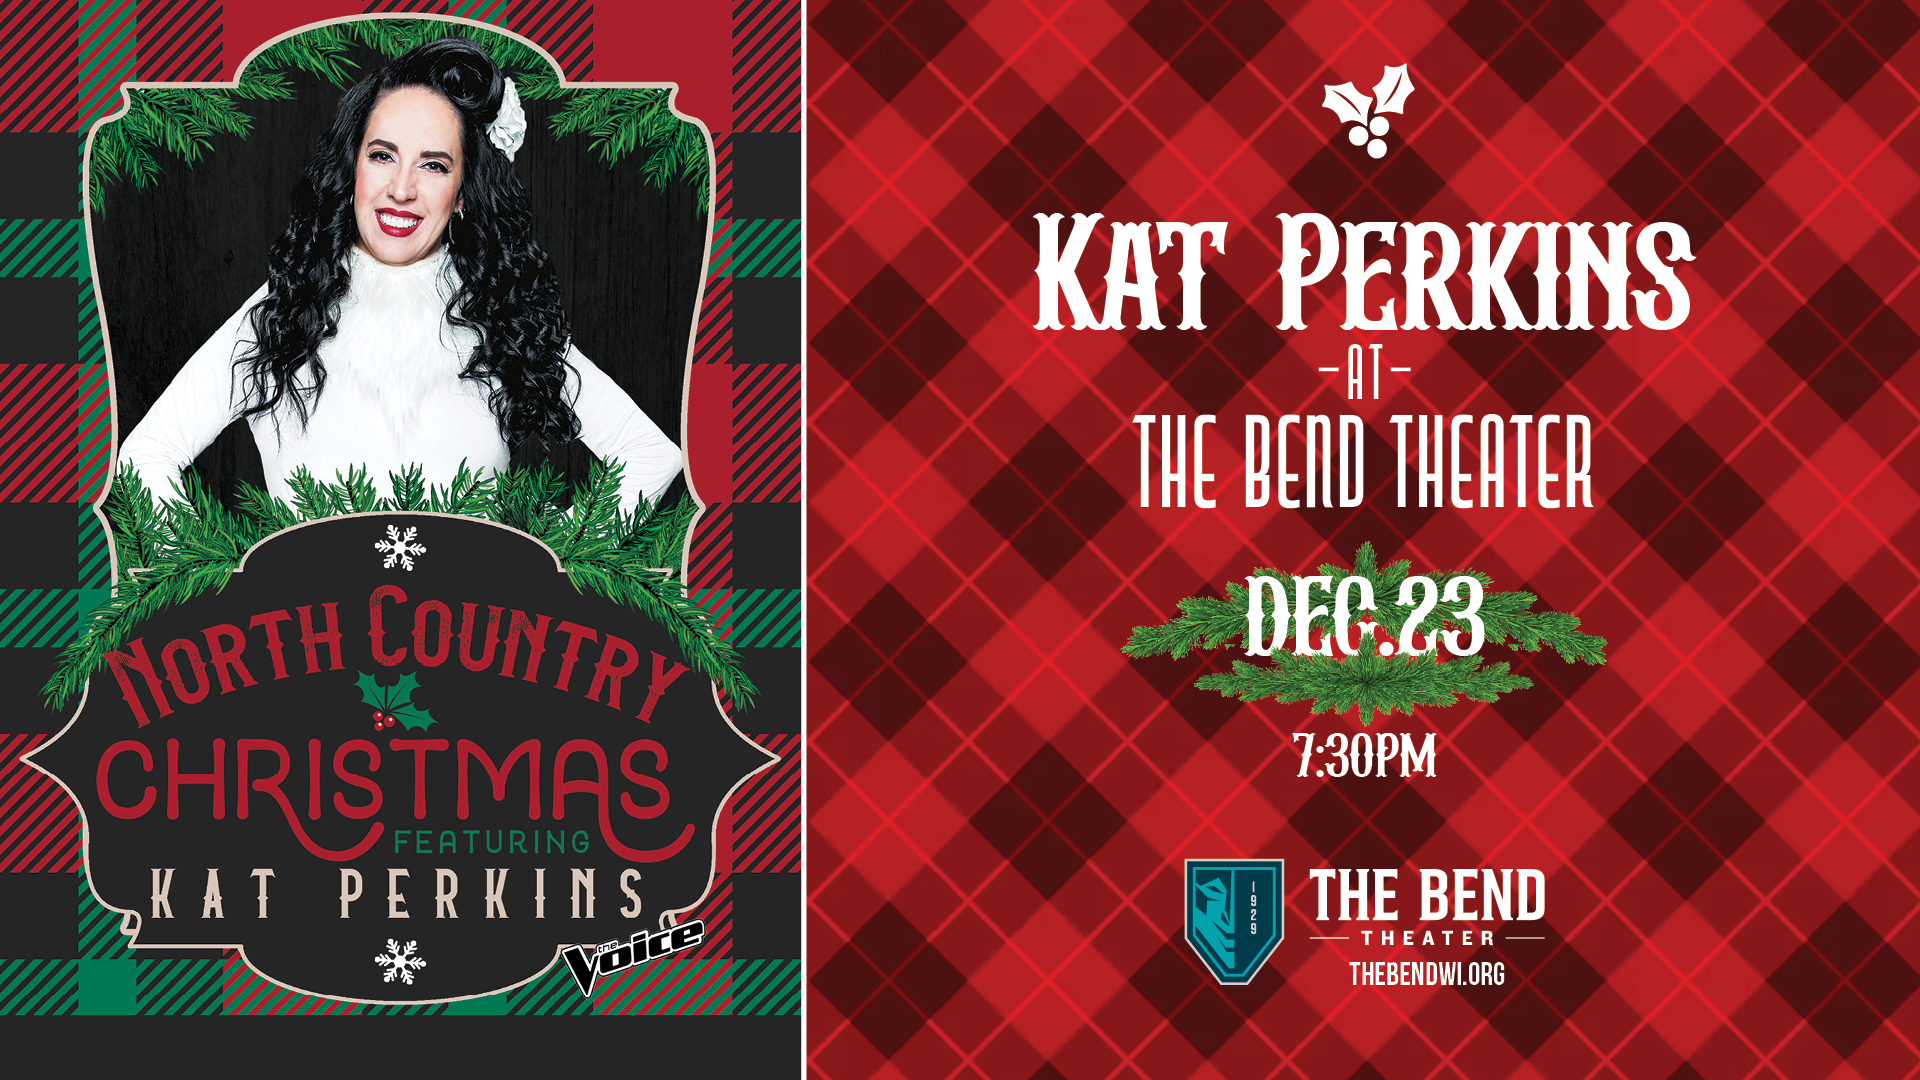 North Country Christmas featuring Kat Perkins at The Bend Theater